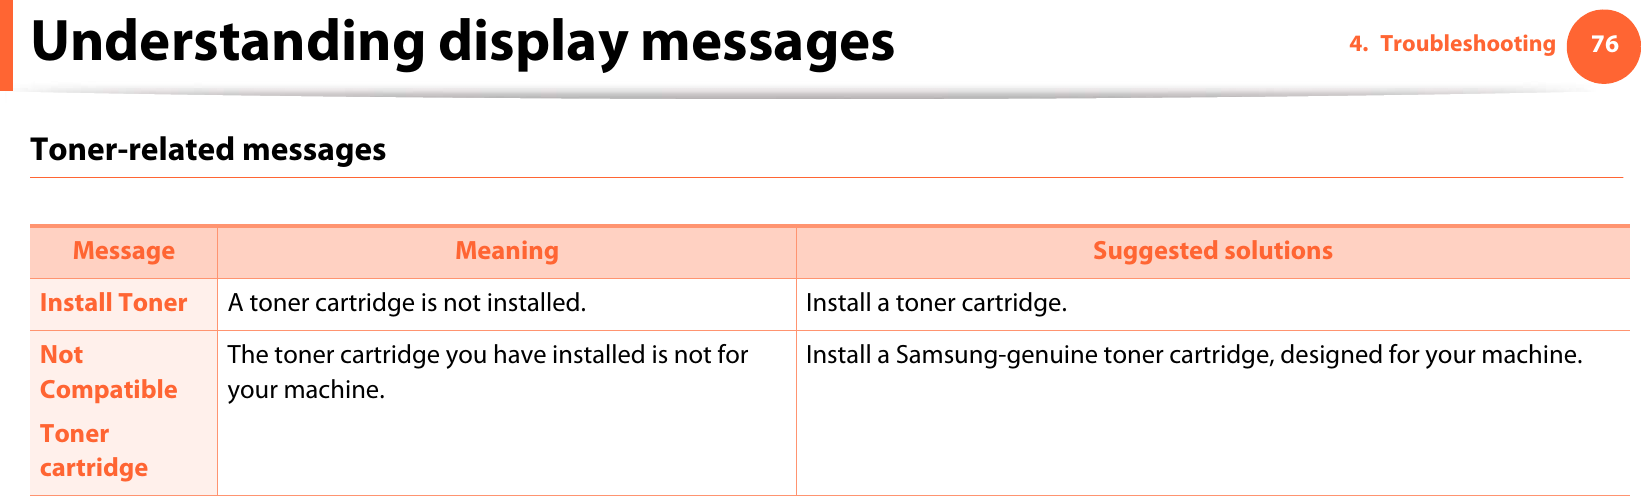 Understanding display messages 764. TroubleshootingToner-related messages Message Meaning Suggested solutionsInstall Toner  A toner cartridge is not installed. Install a toner cartridge.Not CompatibleToner cartridgeThe toner cartridge you have installed is not for your machine.Install a Samsung-genuine toner cartridge, designed for your machine.